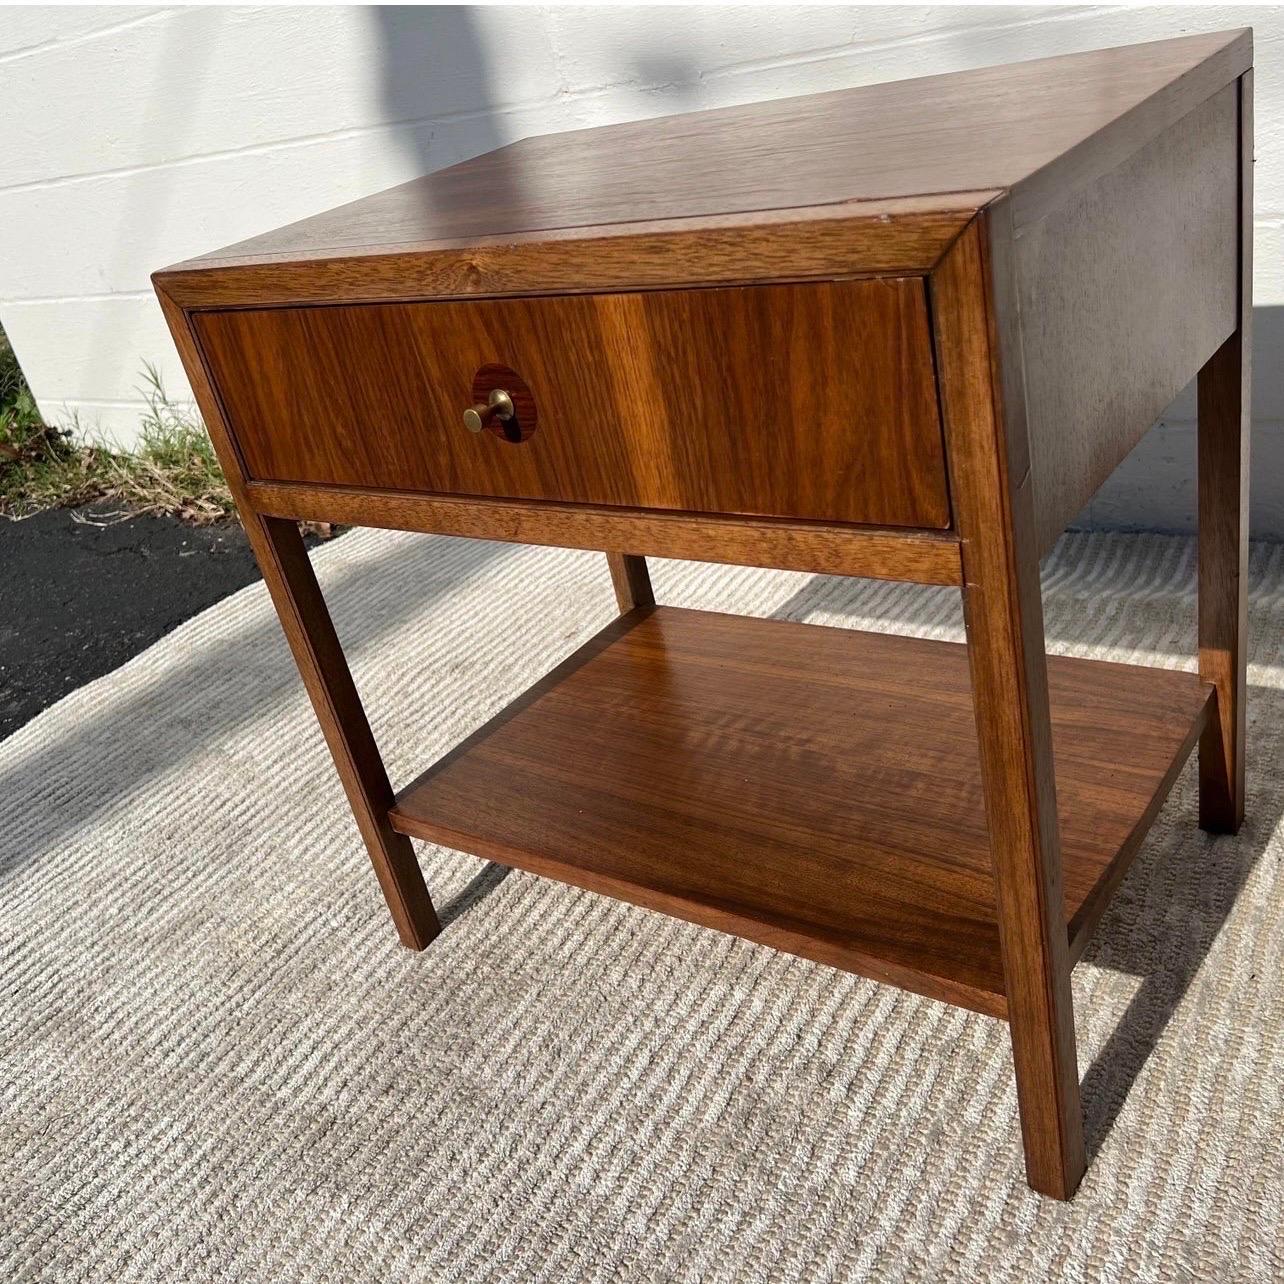 Early and rare Mid-Century Modern vintage side, end, occasional or bedside table in the manner of Milo Baughman for Arch Gordon in the 1950s. Professionally refinished, the beautifully grained walnut creates striking patterns.